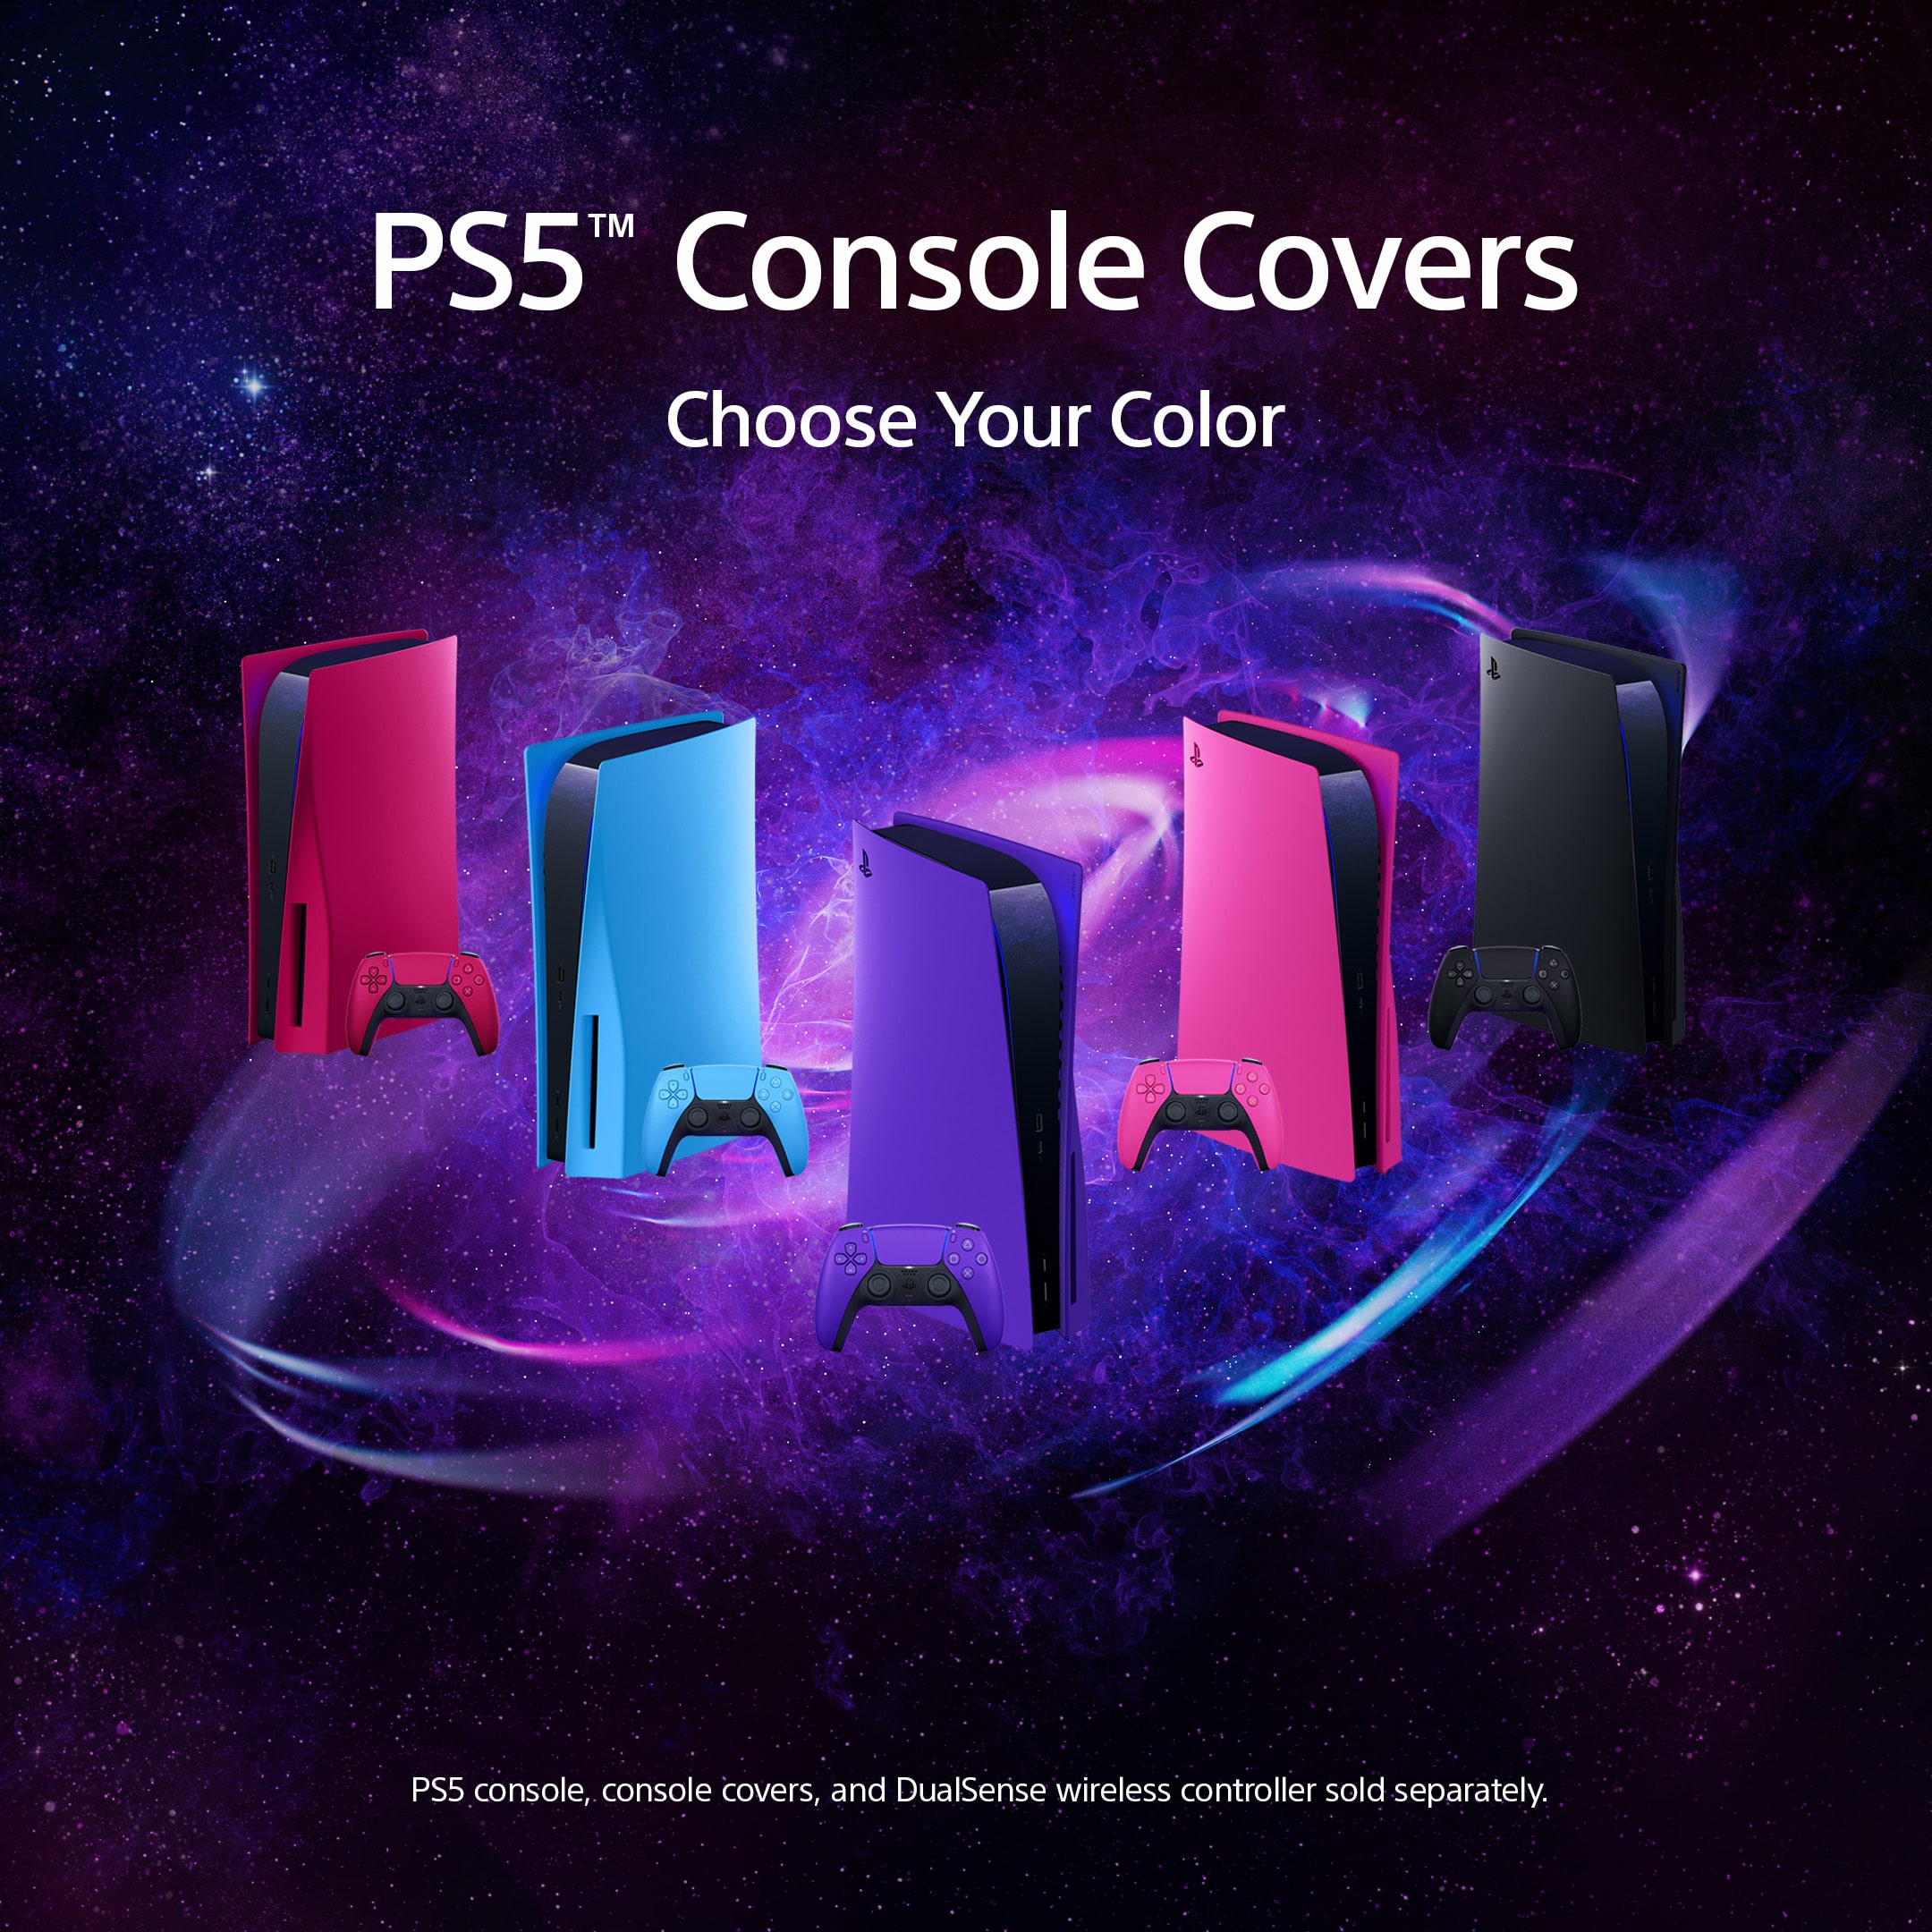 PS Direct - Console Covers - June 22